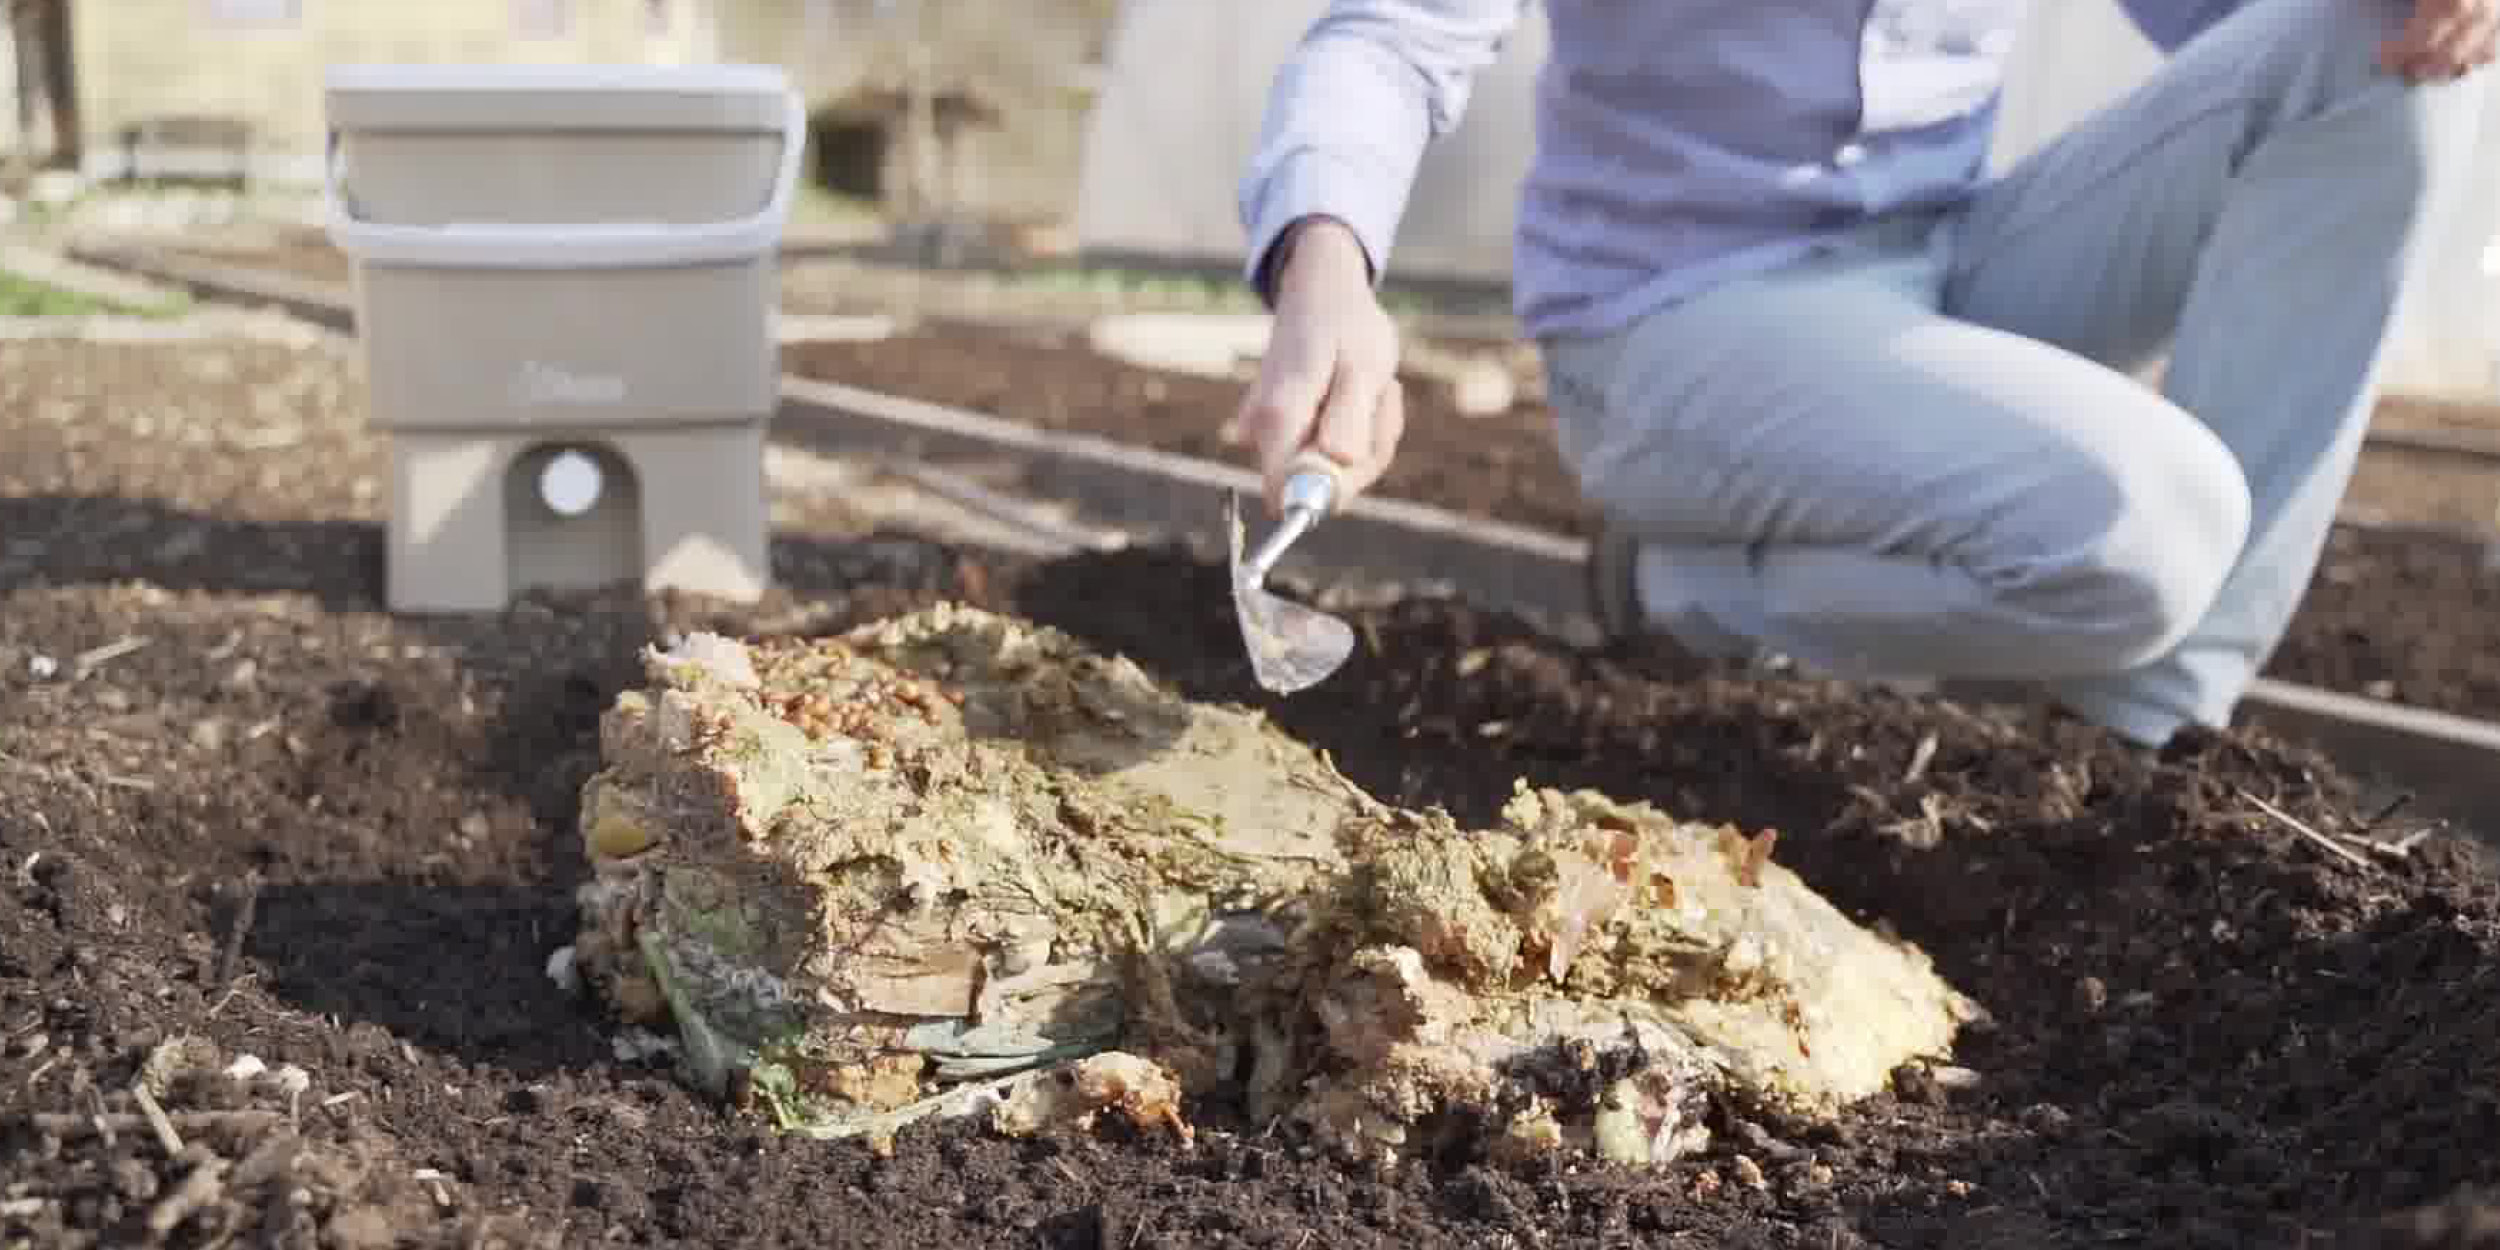 Bury the fermented waste from your urban composter